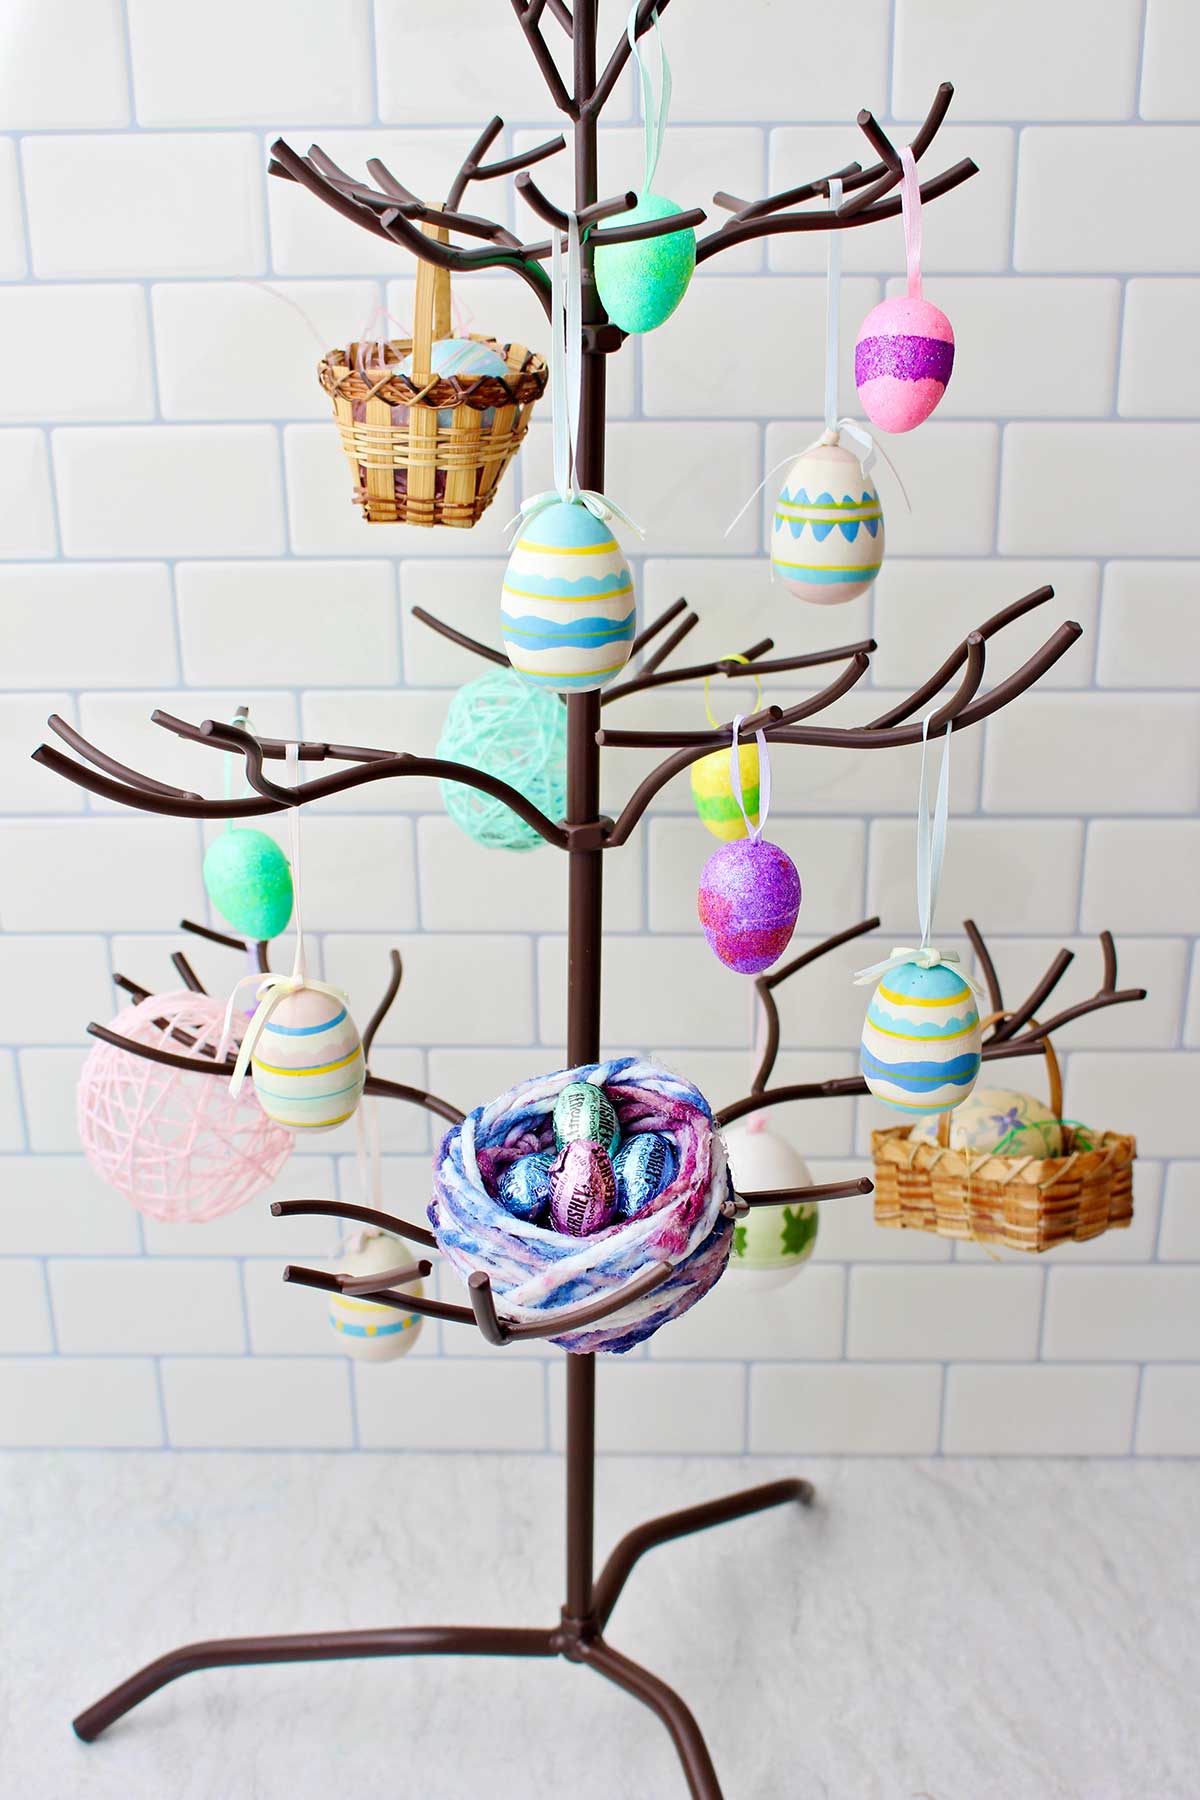 A metal tree stand with Easter decorations hanging from the branches and a colorful bird nest made of string holding candies.